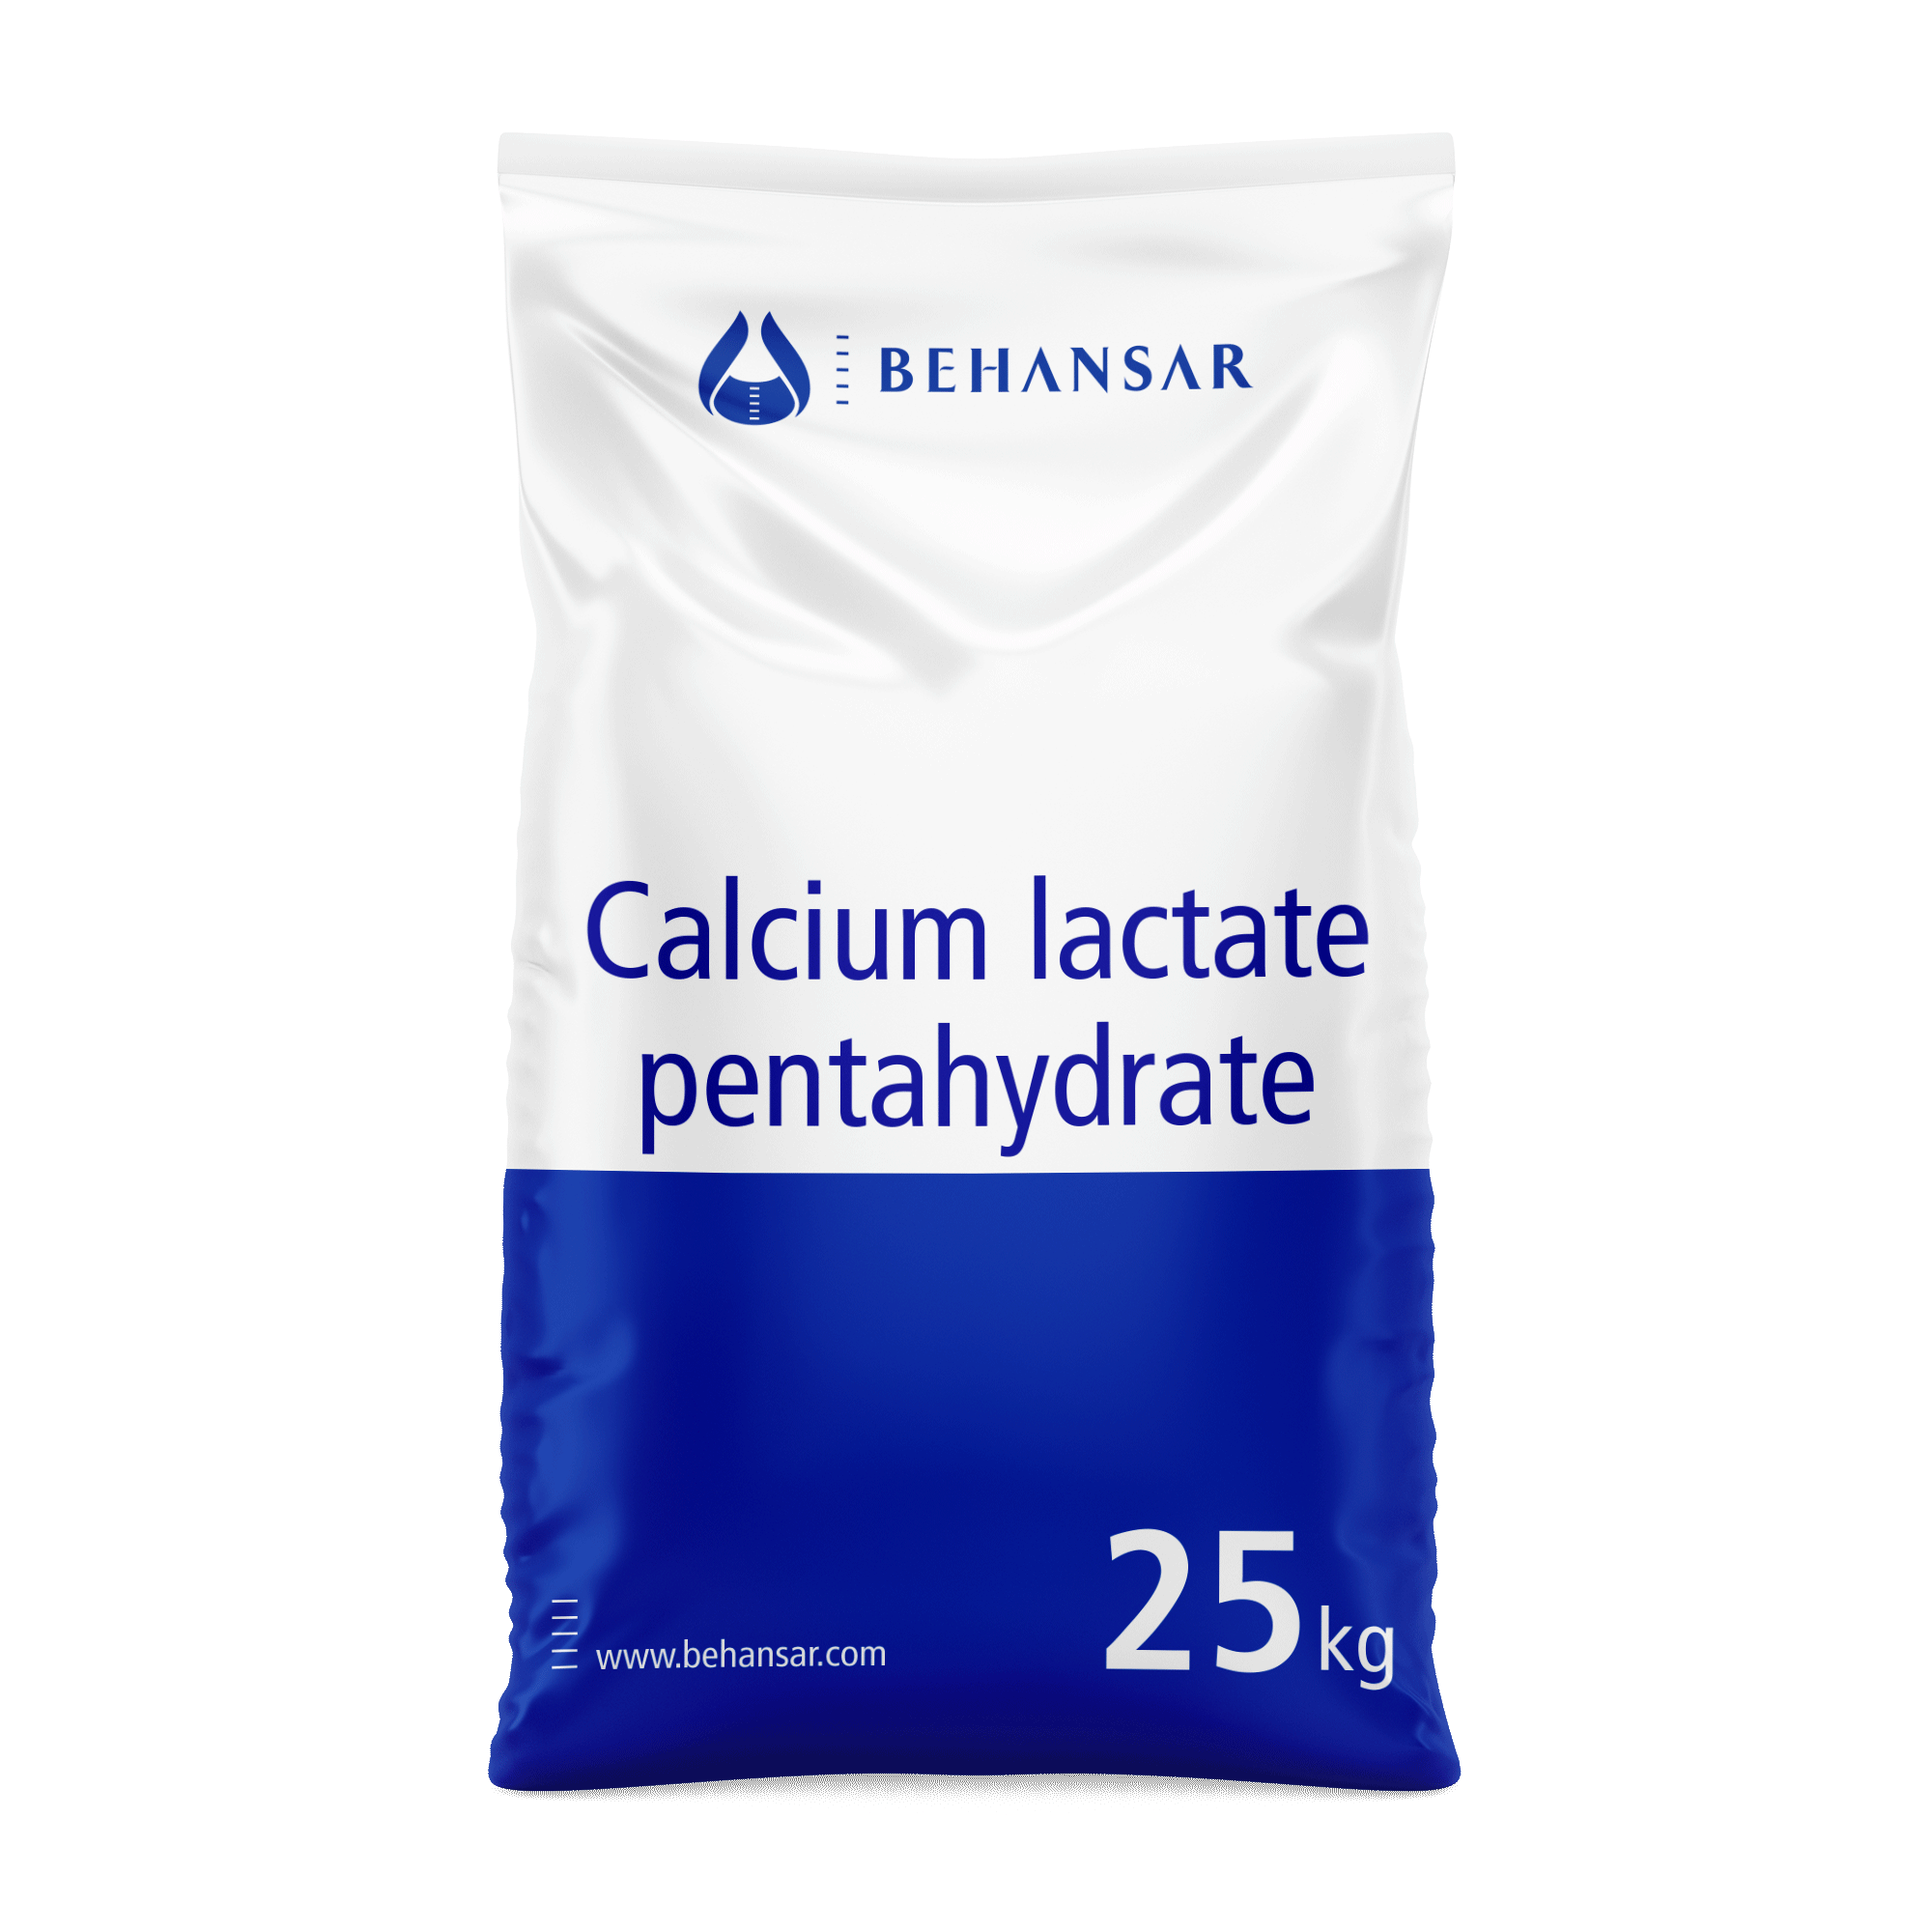 Calcium lactate pentahydrate is one of the products of Behansar Co